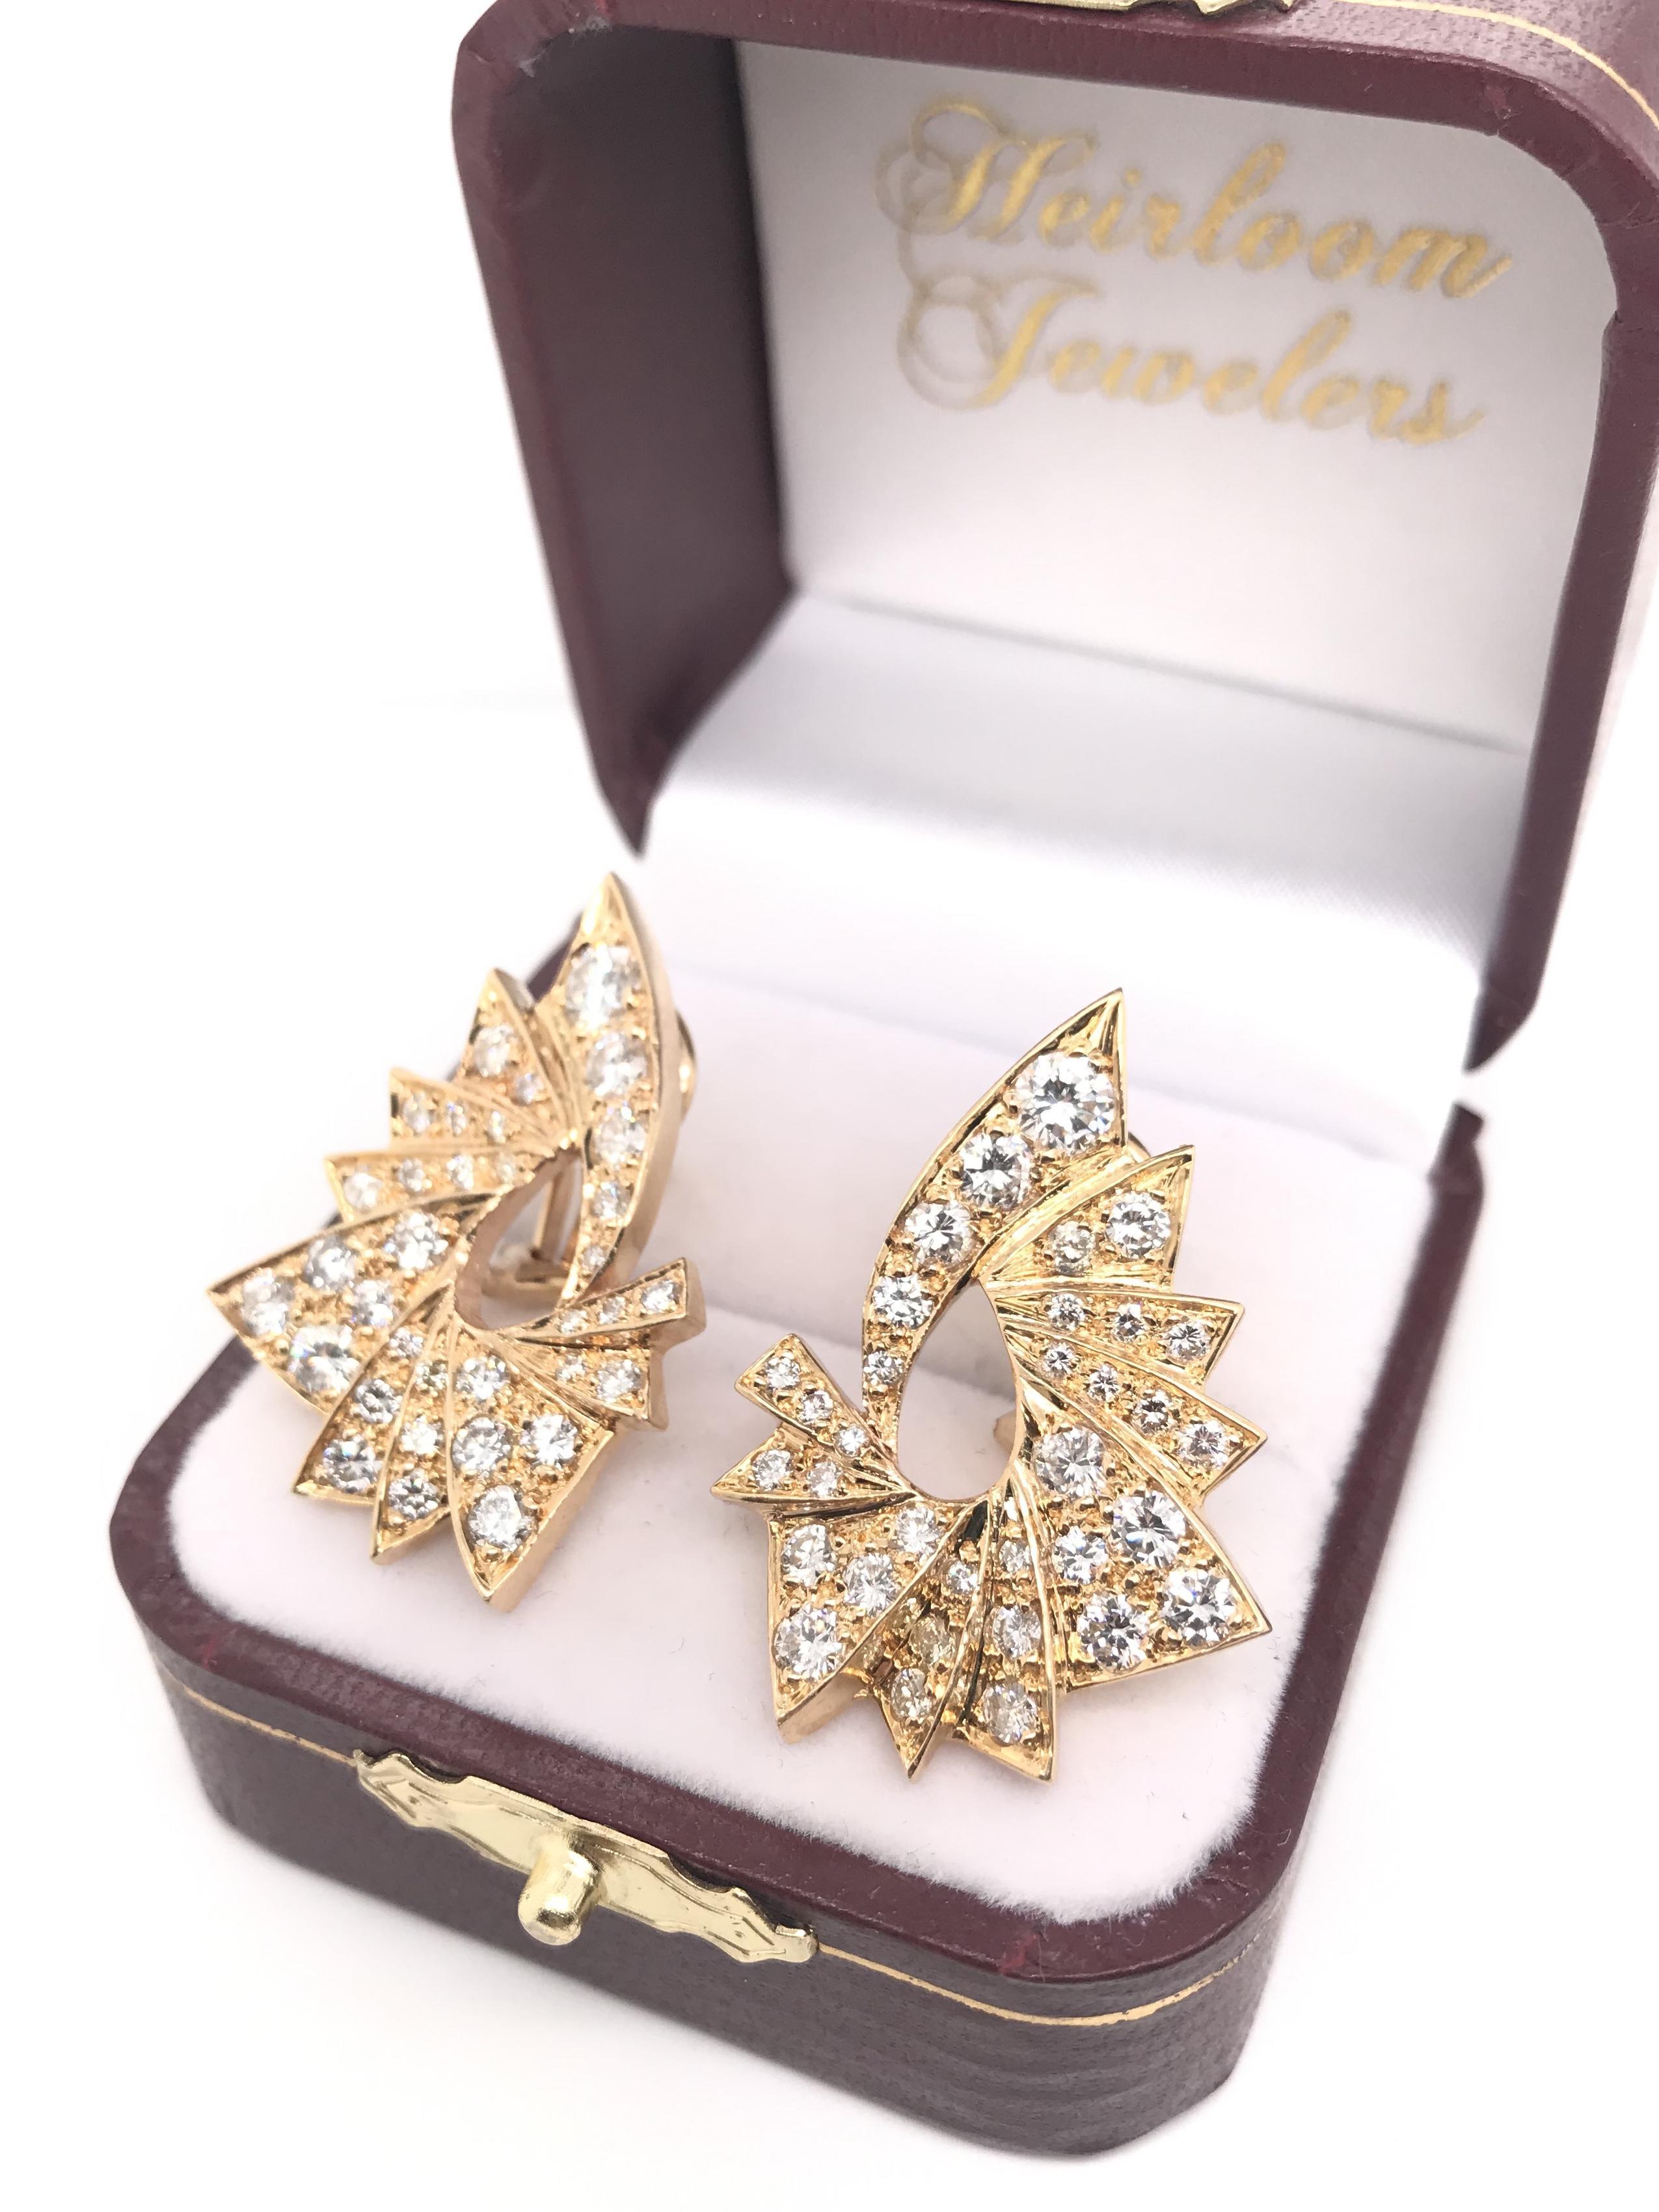 Contemporary Estate 3 Carat DTW Diamond Earrings In Excellent Condition For Sale In Montgomery, AL